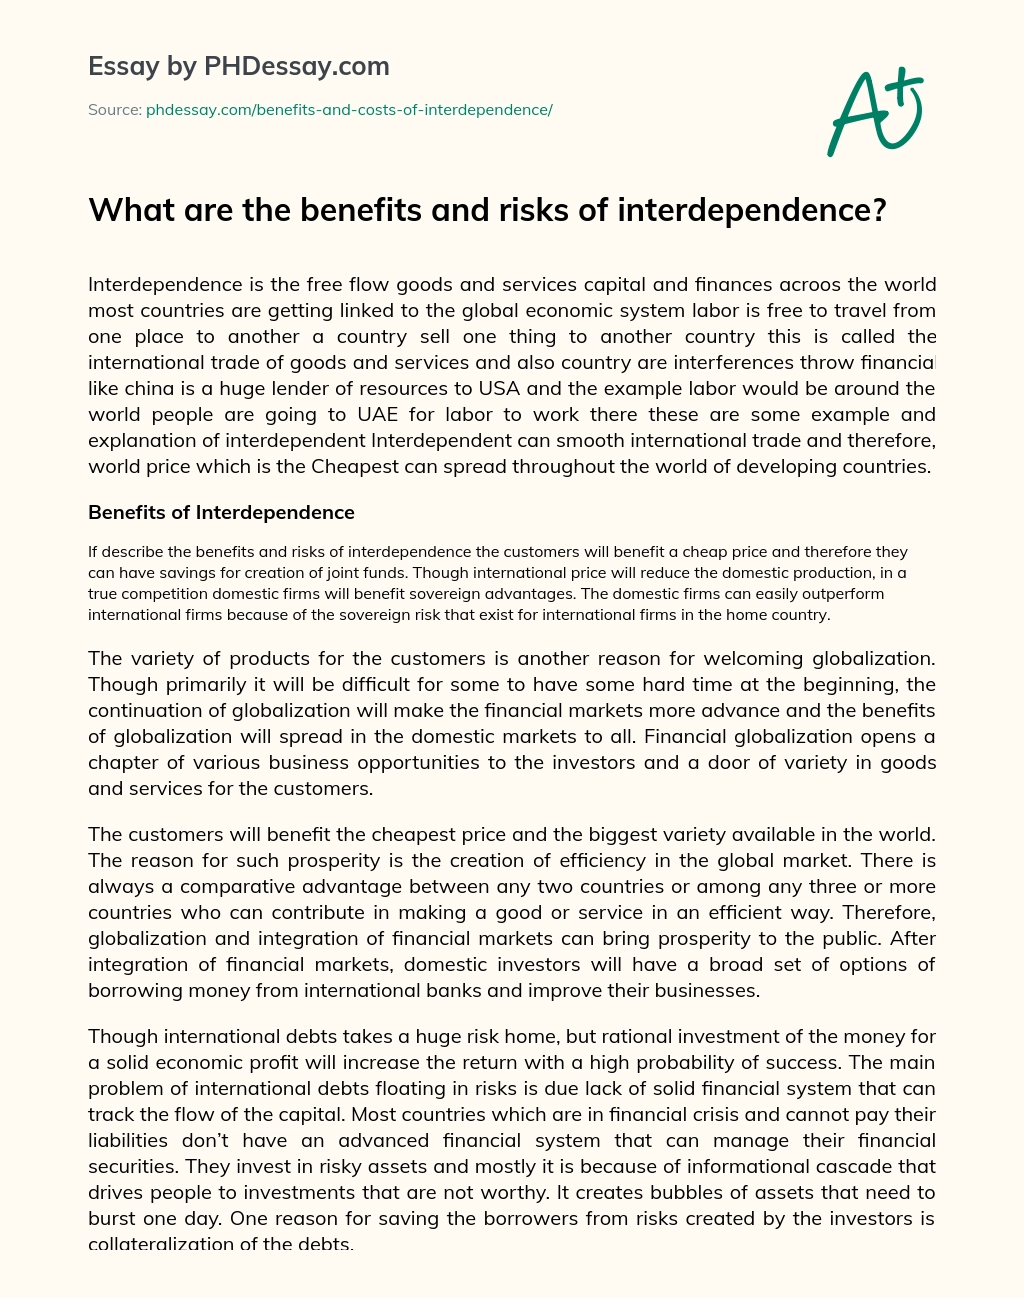 What are the benefits and risks of interdependence? essay